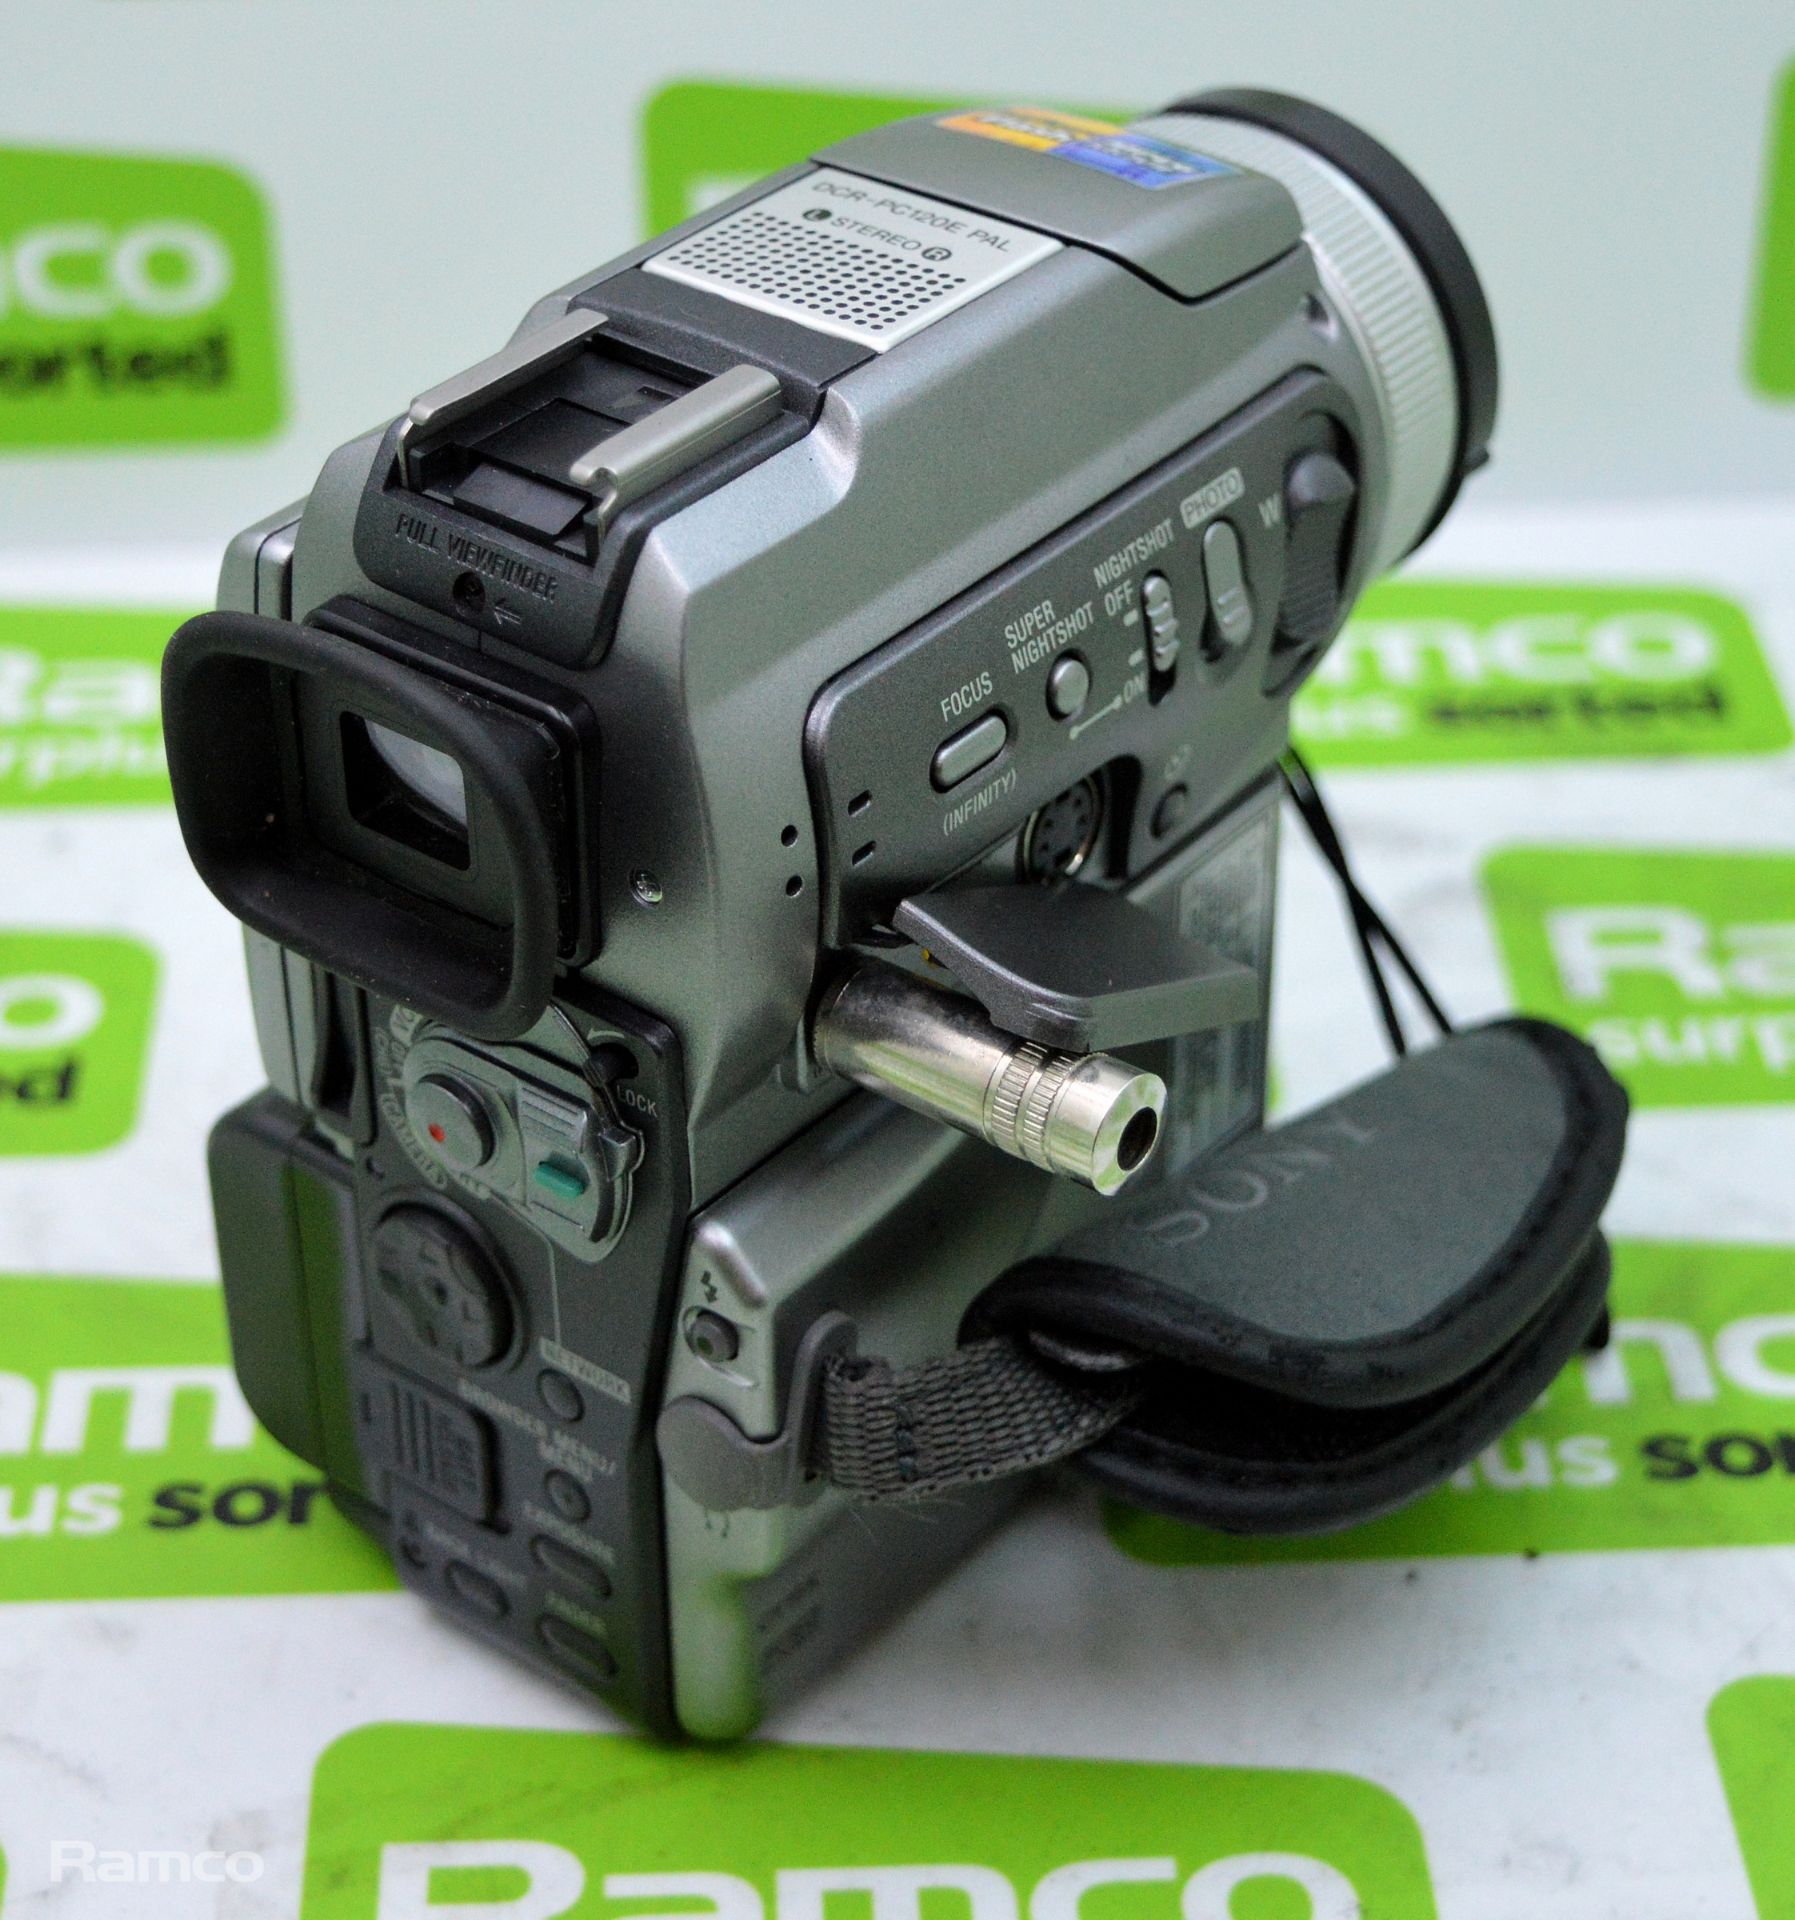 Sony DCR-PC120E Video Camcorder With Accessories In Case - Image 5 of 6